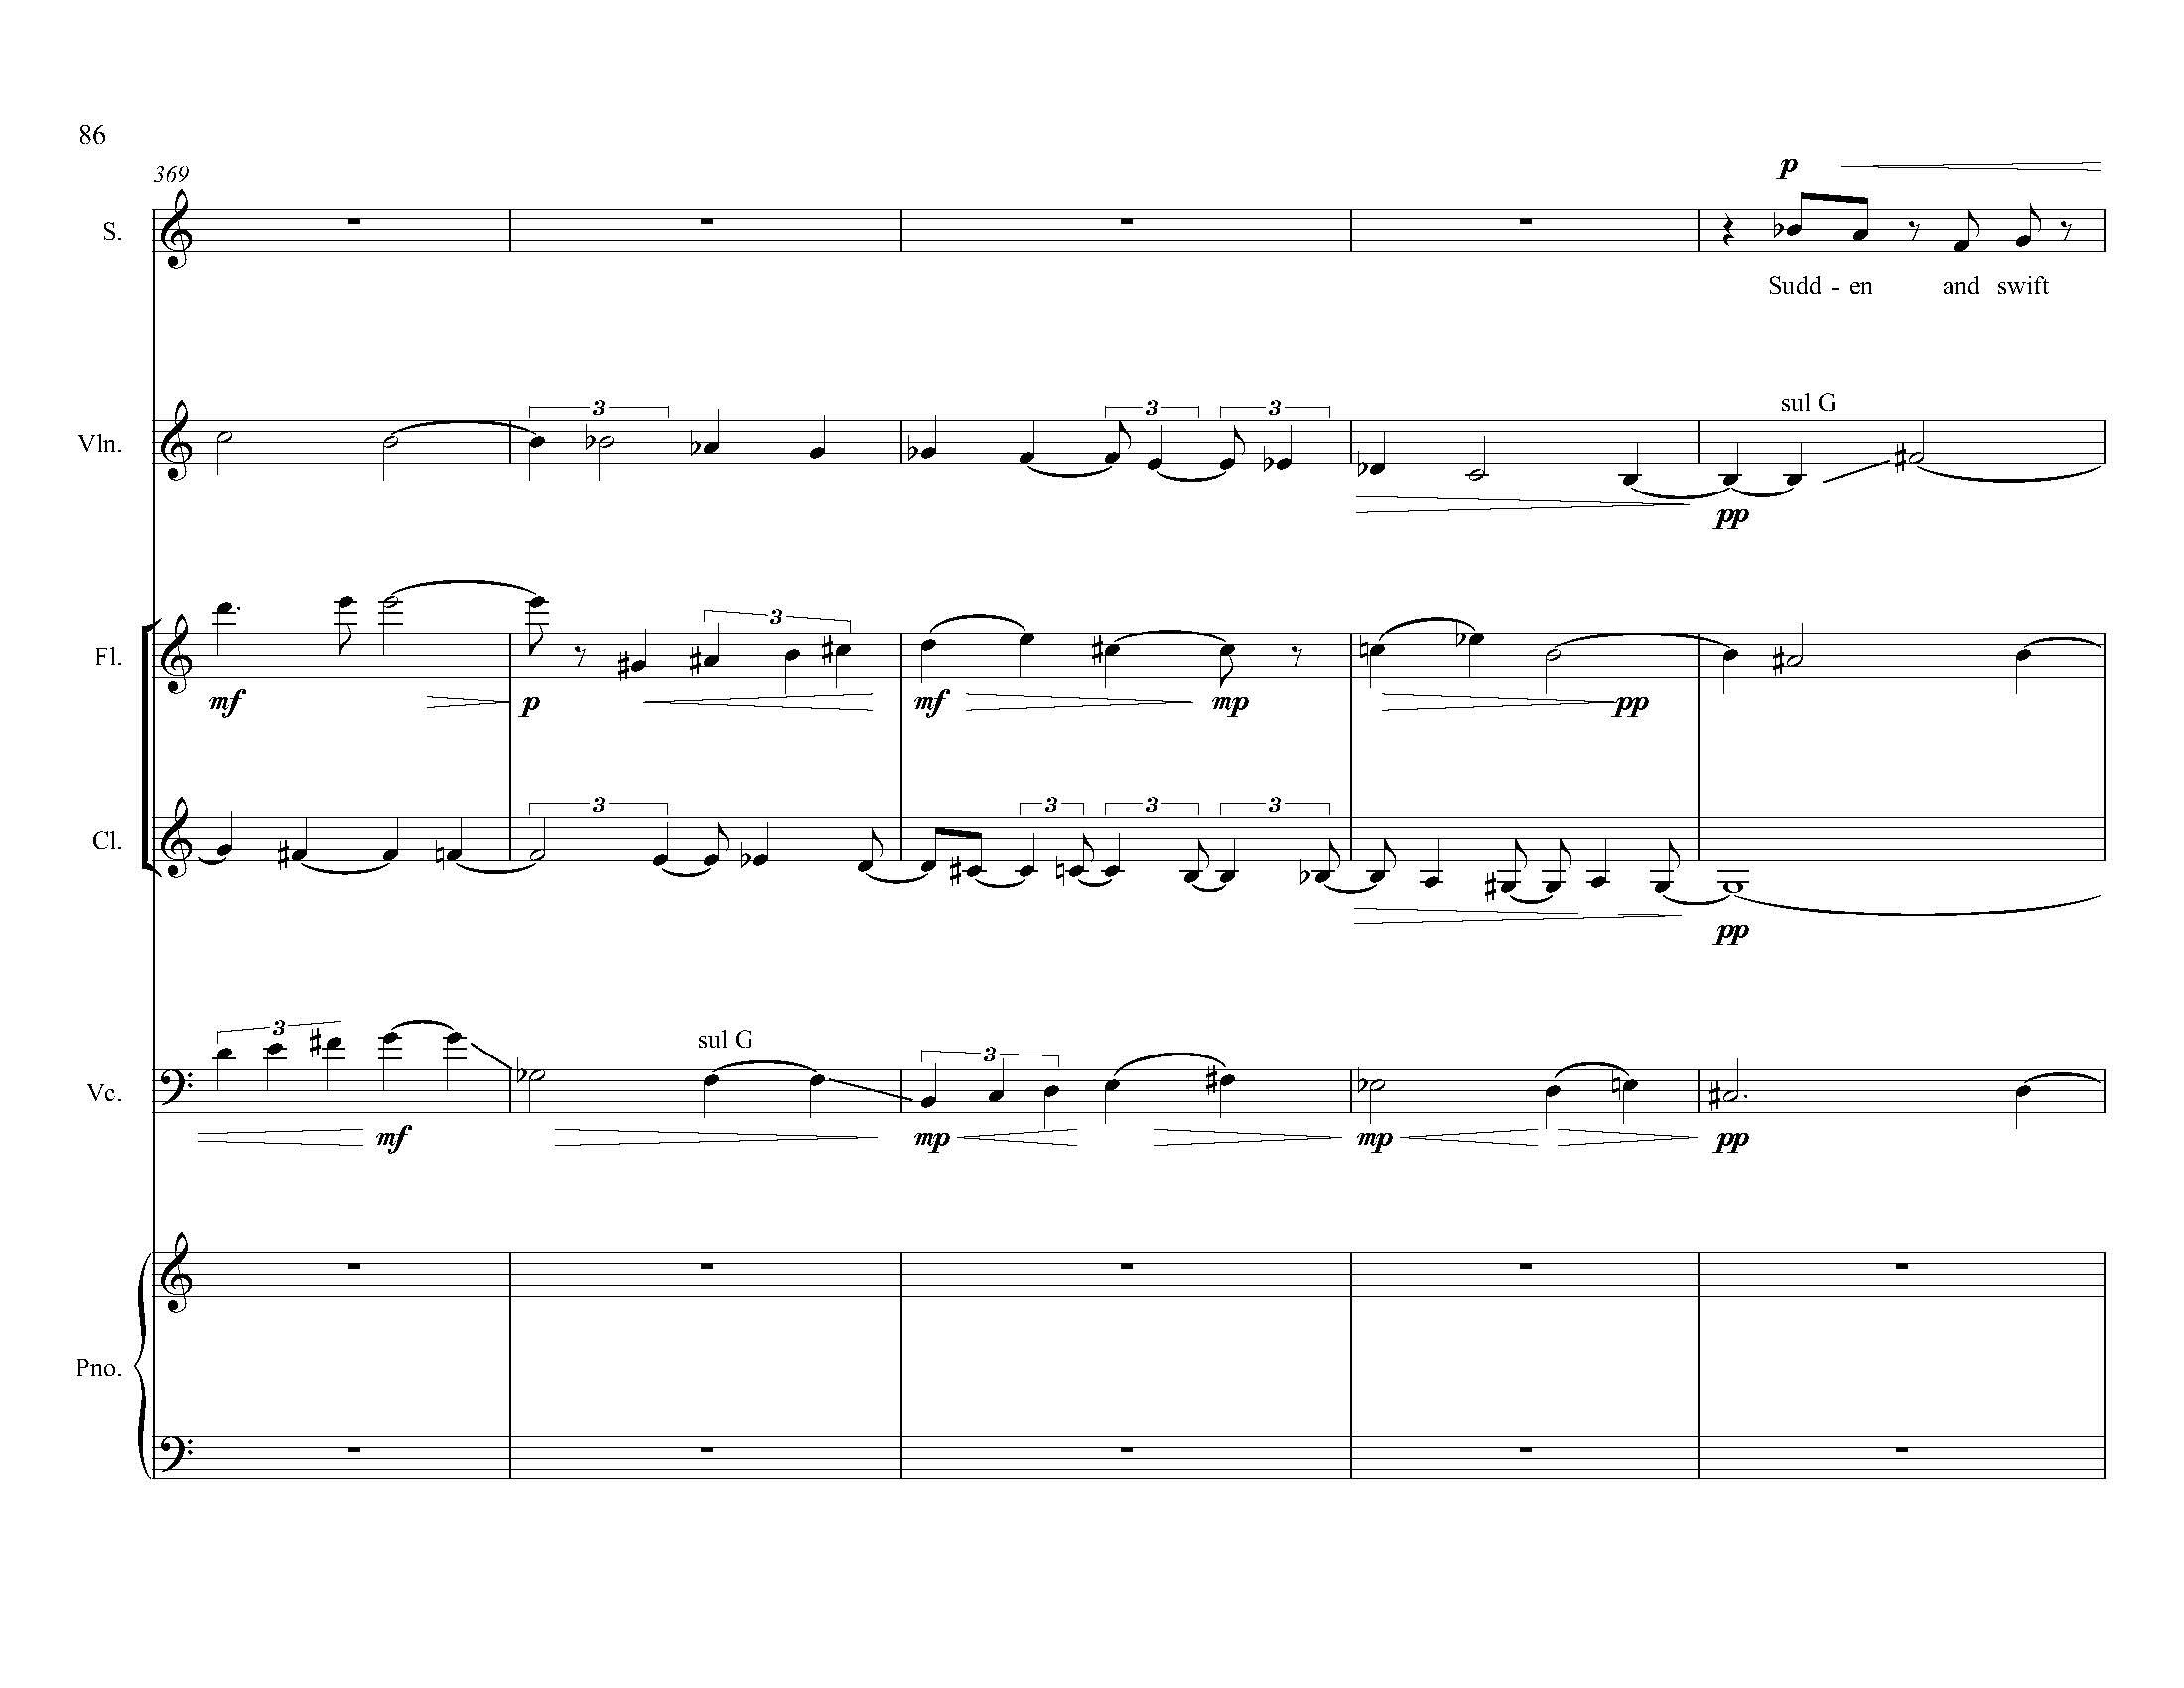 The Hill Wife - Complete Score_Page_094.jpg